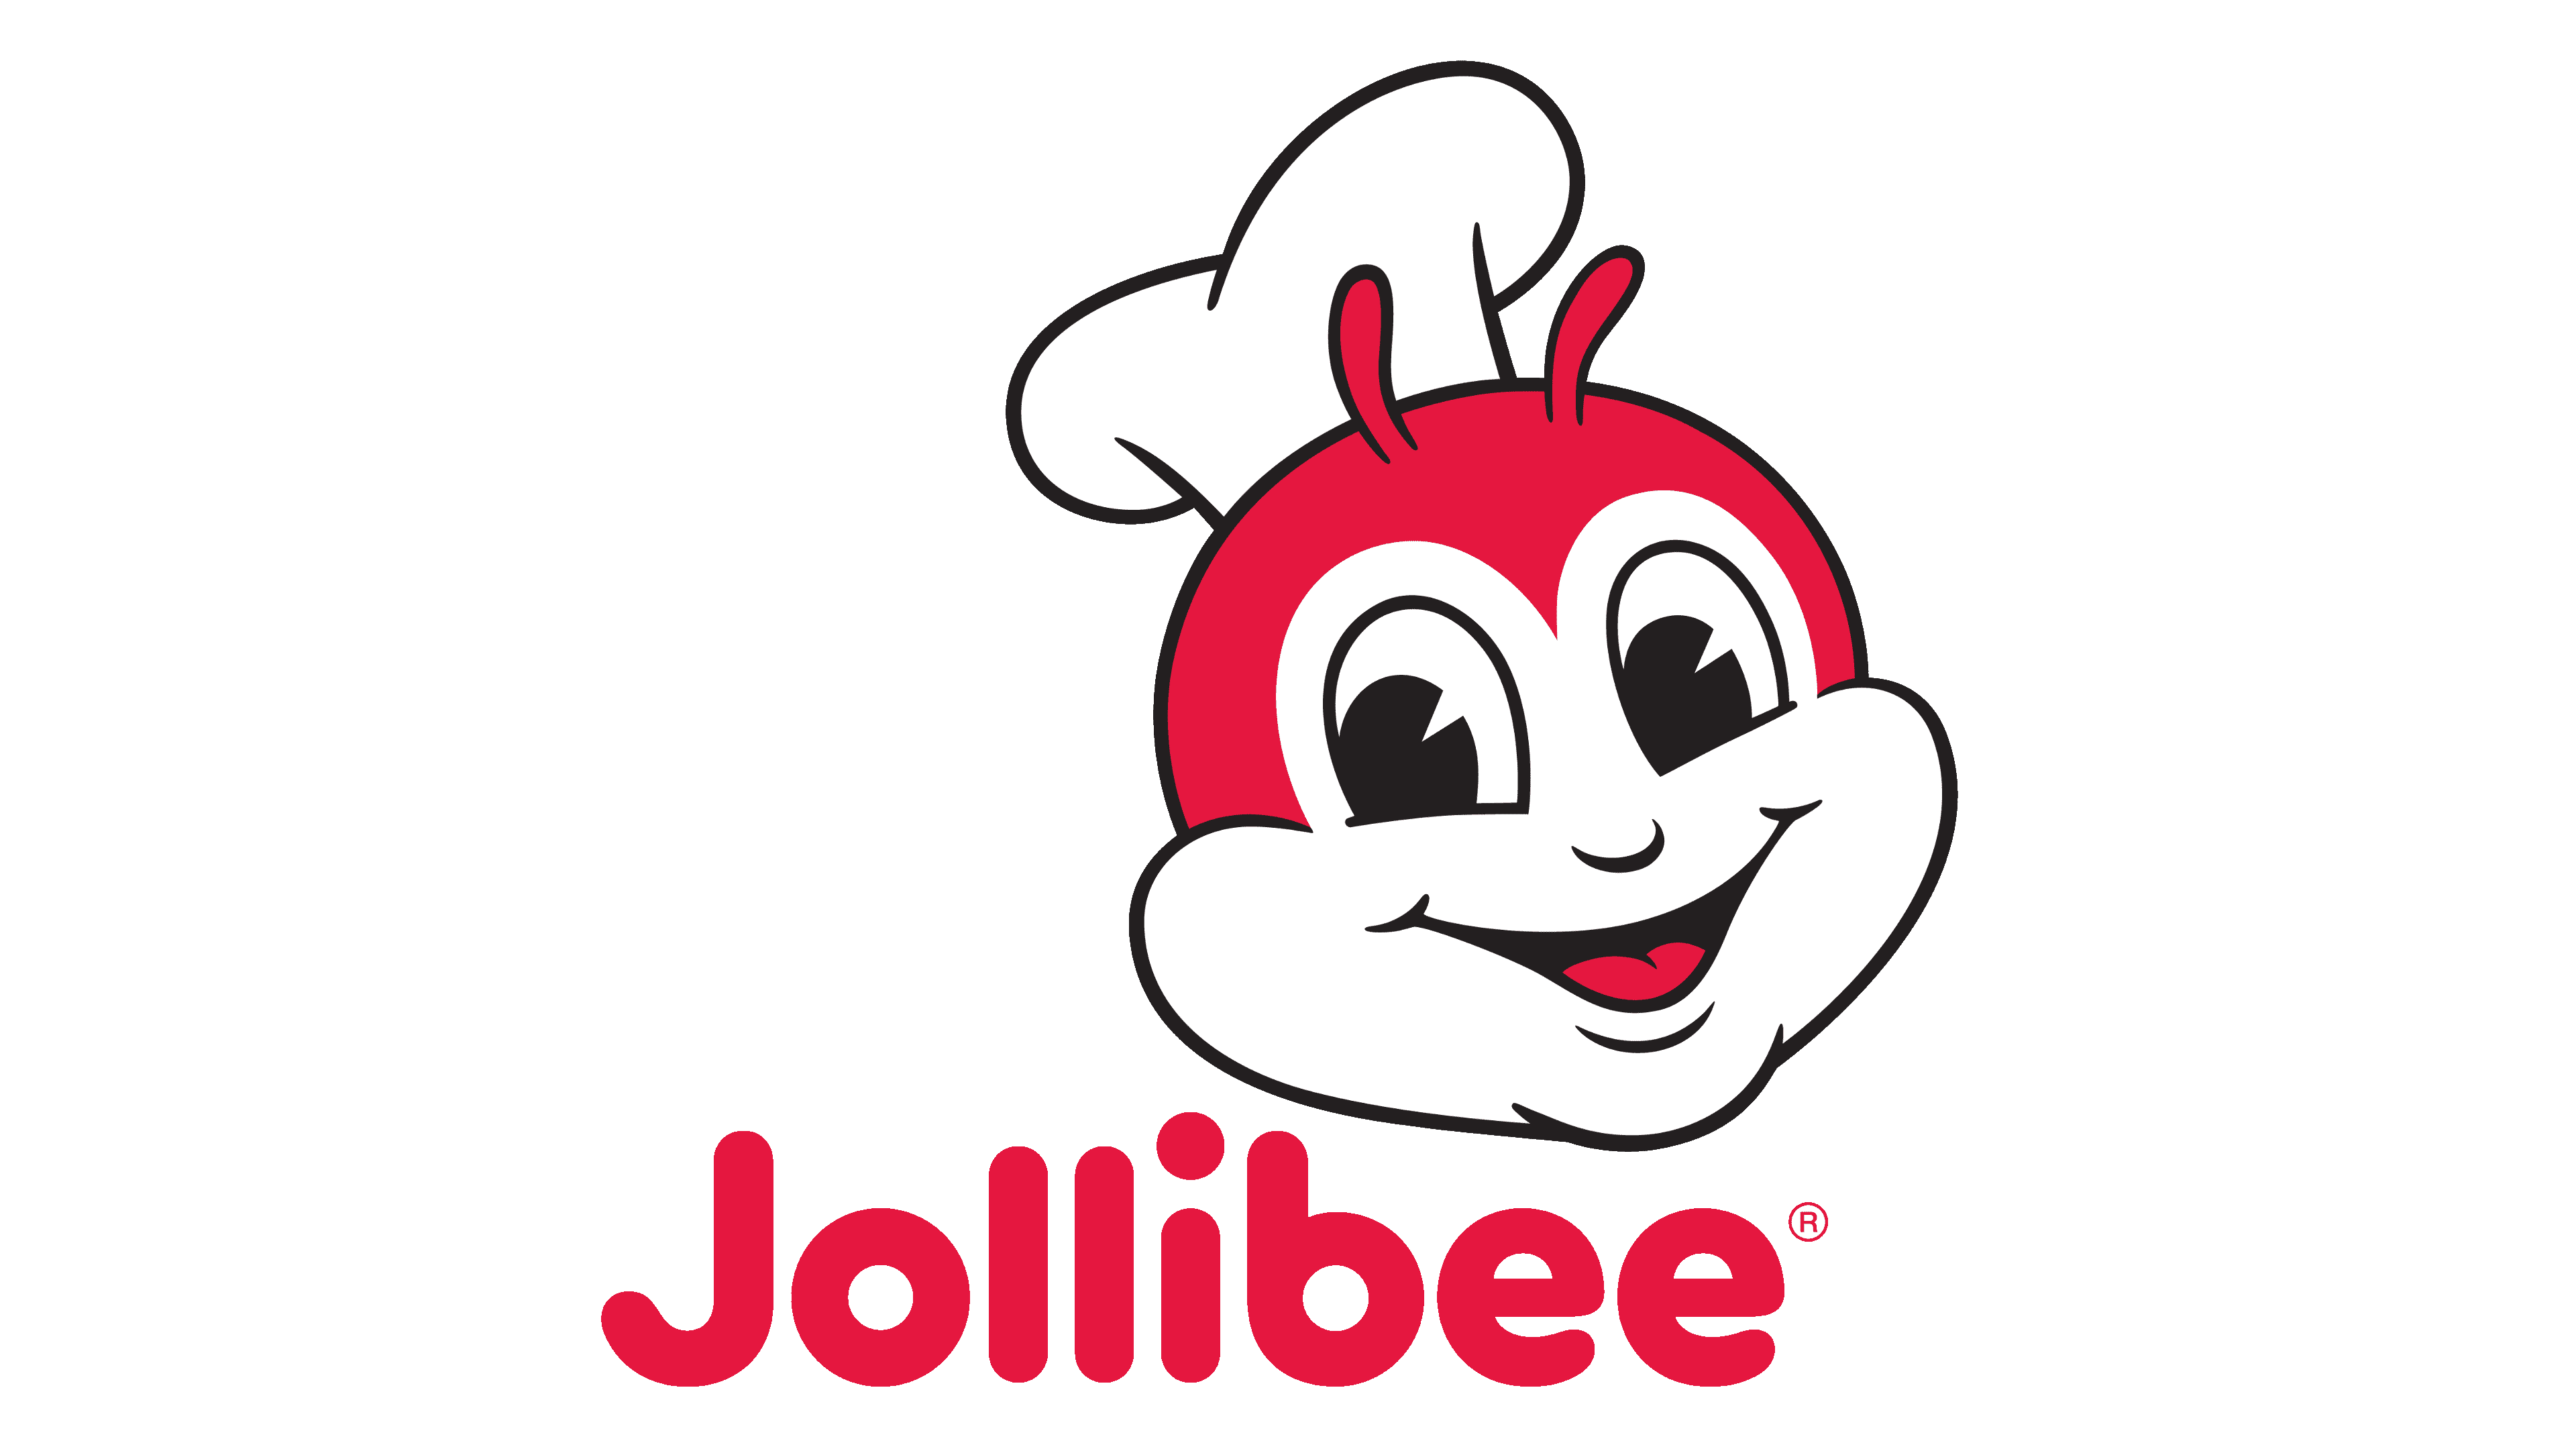 Jollibee Logo And Symbol Meaning History Png Brand